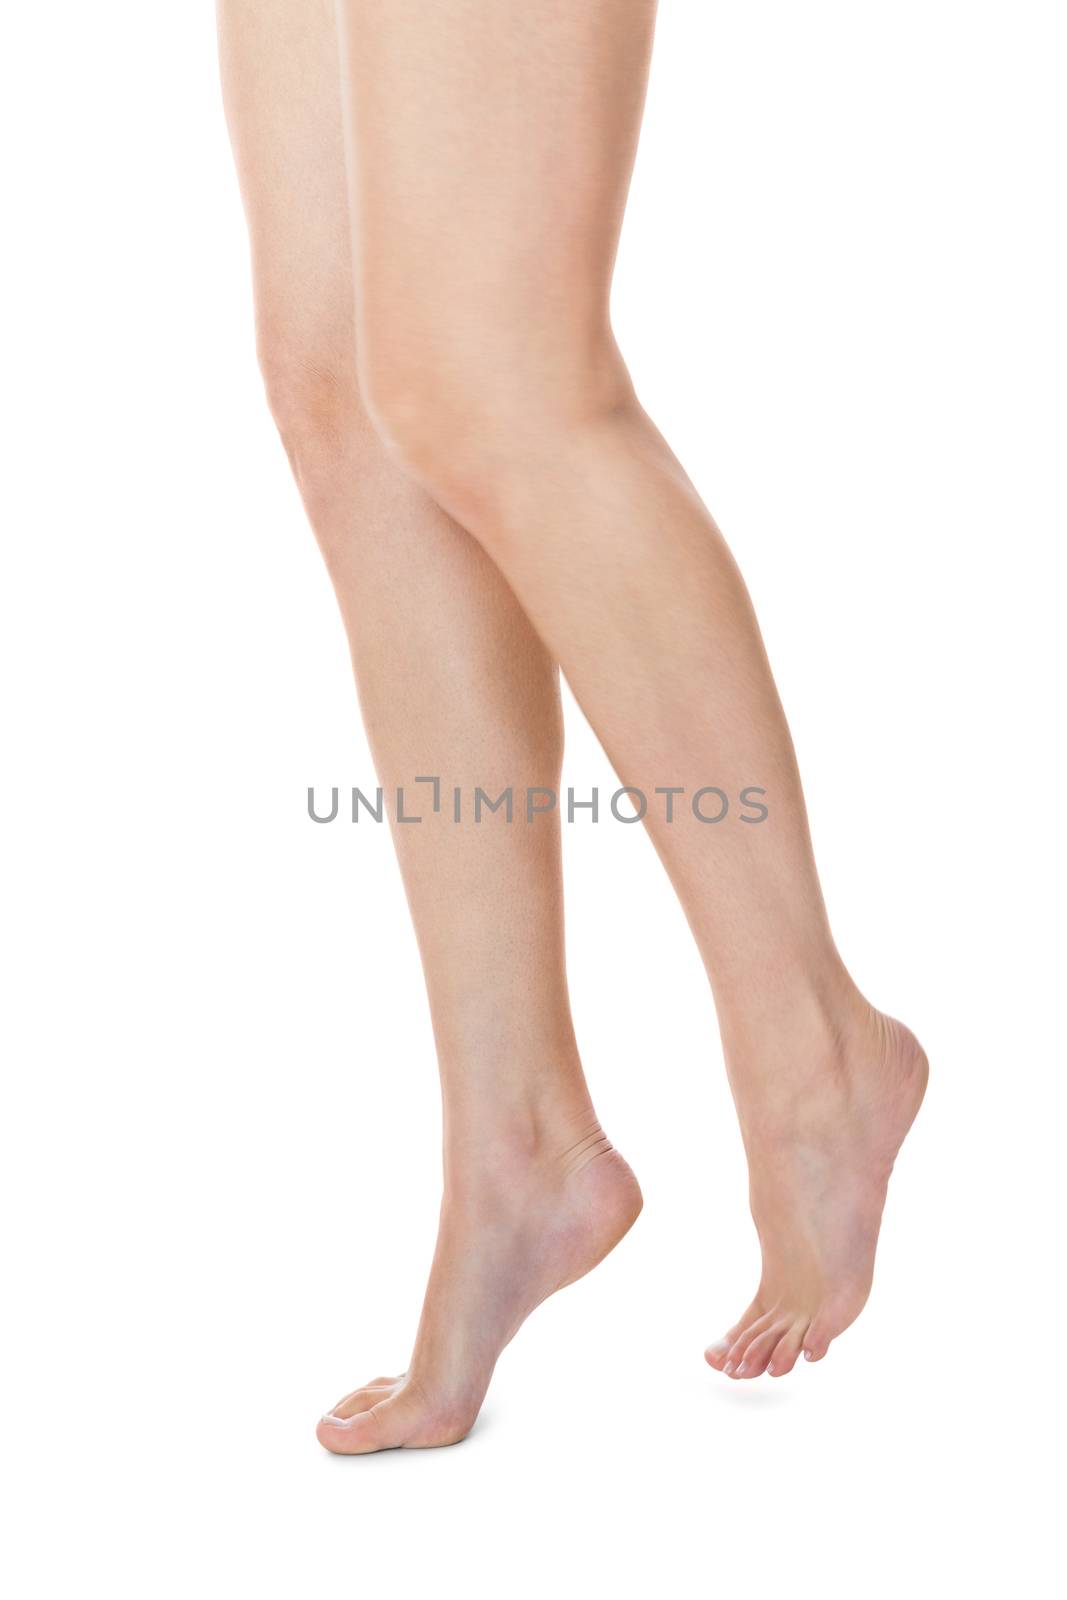 Elegant crossed long bare shapely female legs with bare feet viewed from above isolated on white with copyspace